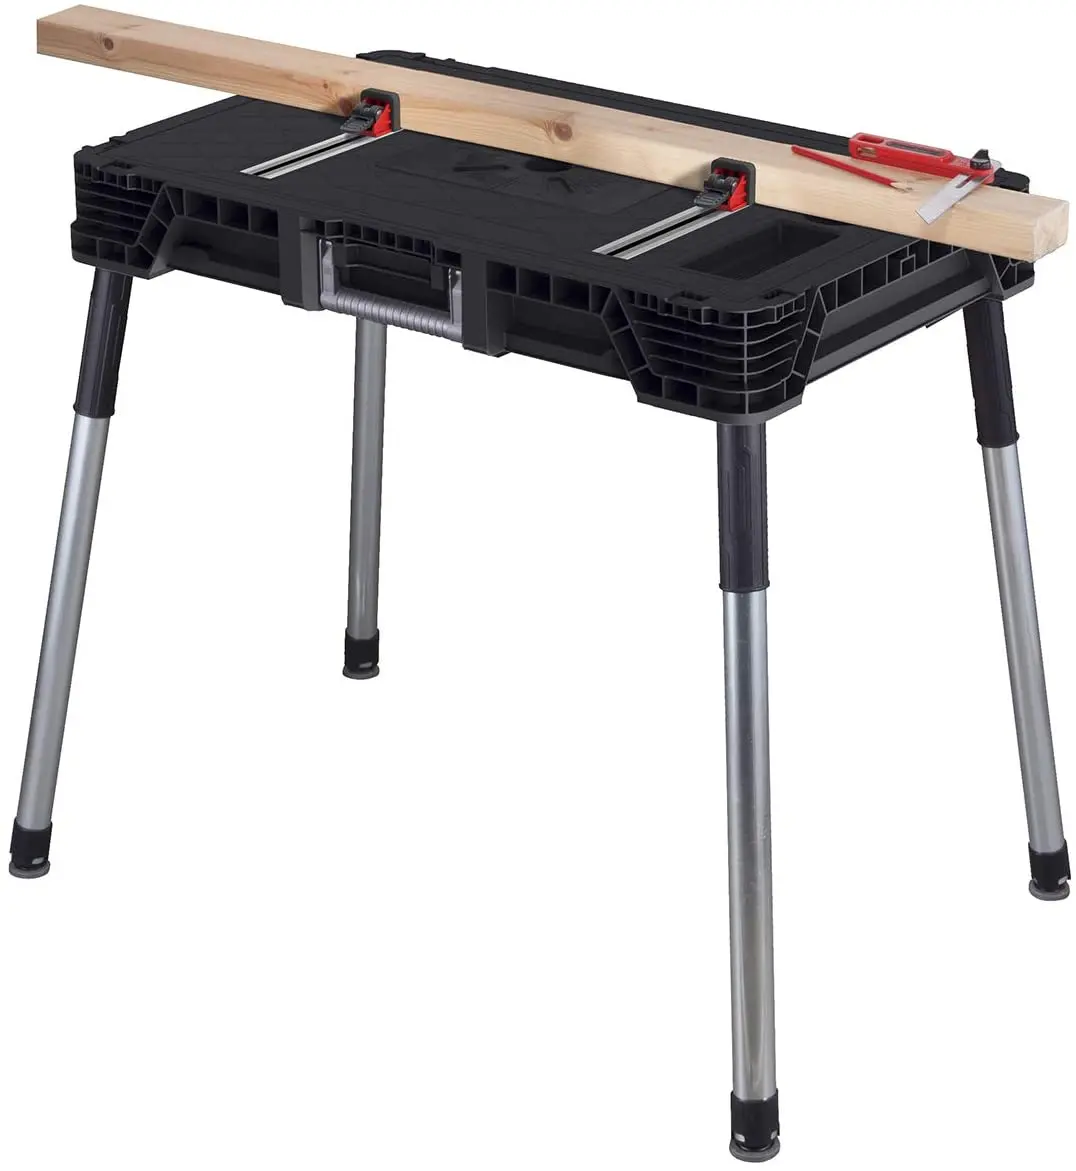 Portable Work Bench and Miter Saw Table for Woodworking Tools and Accessories with Included Wood Clamps Removable Table Legs